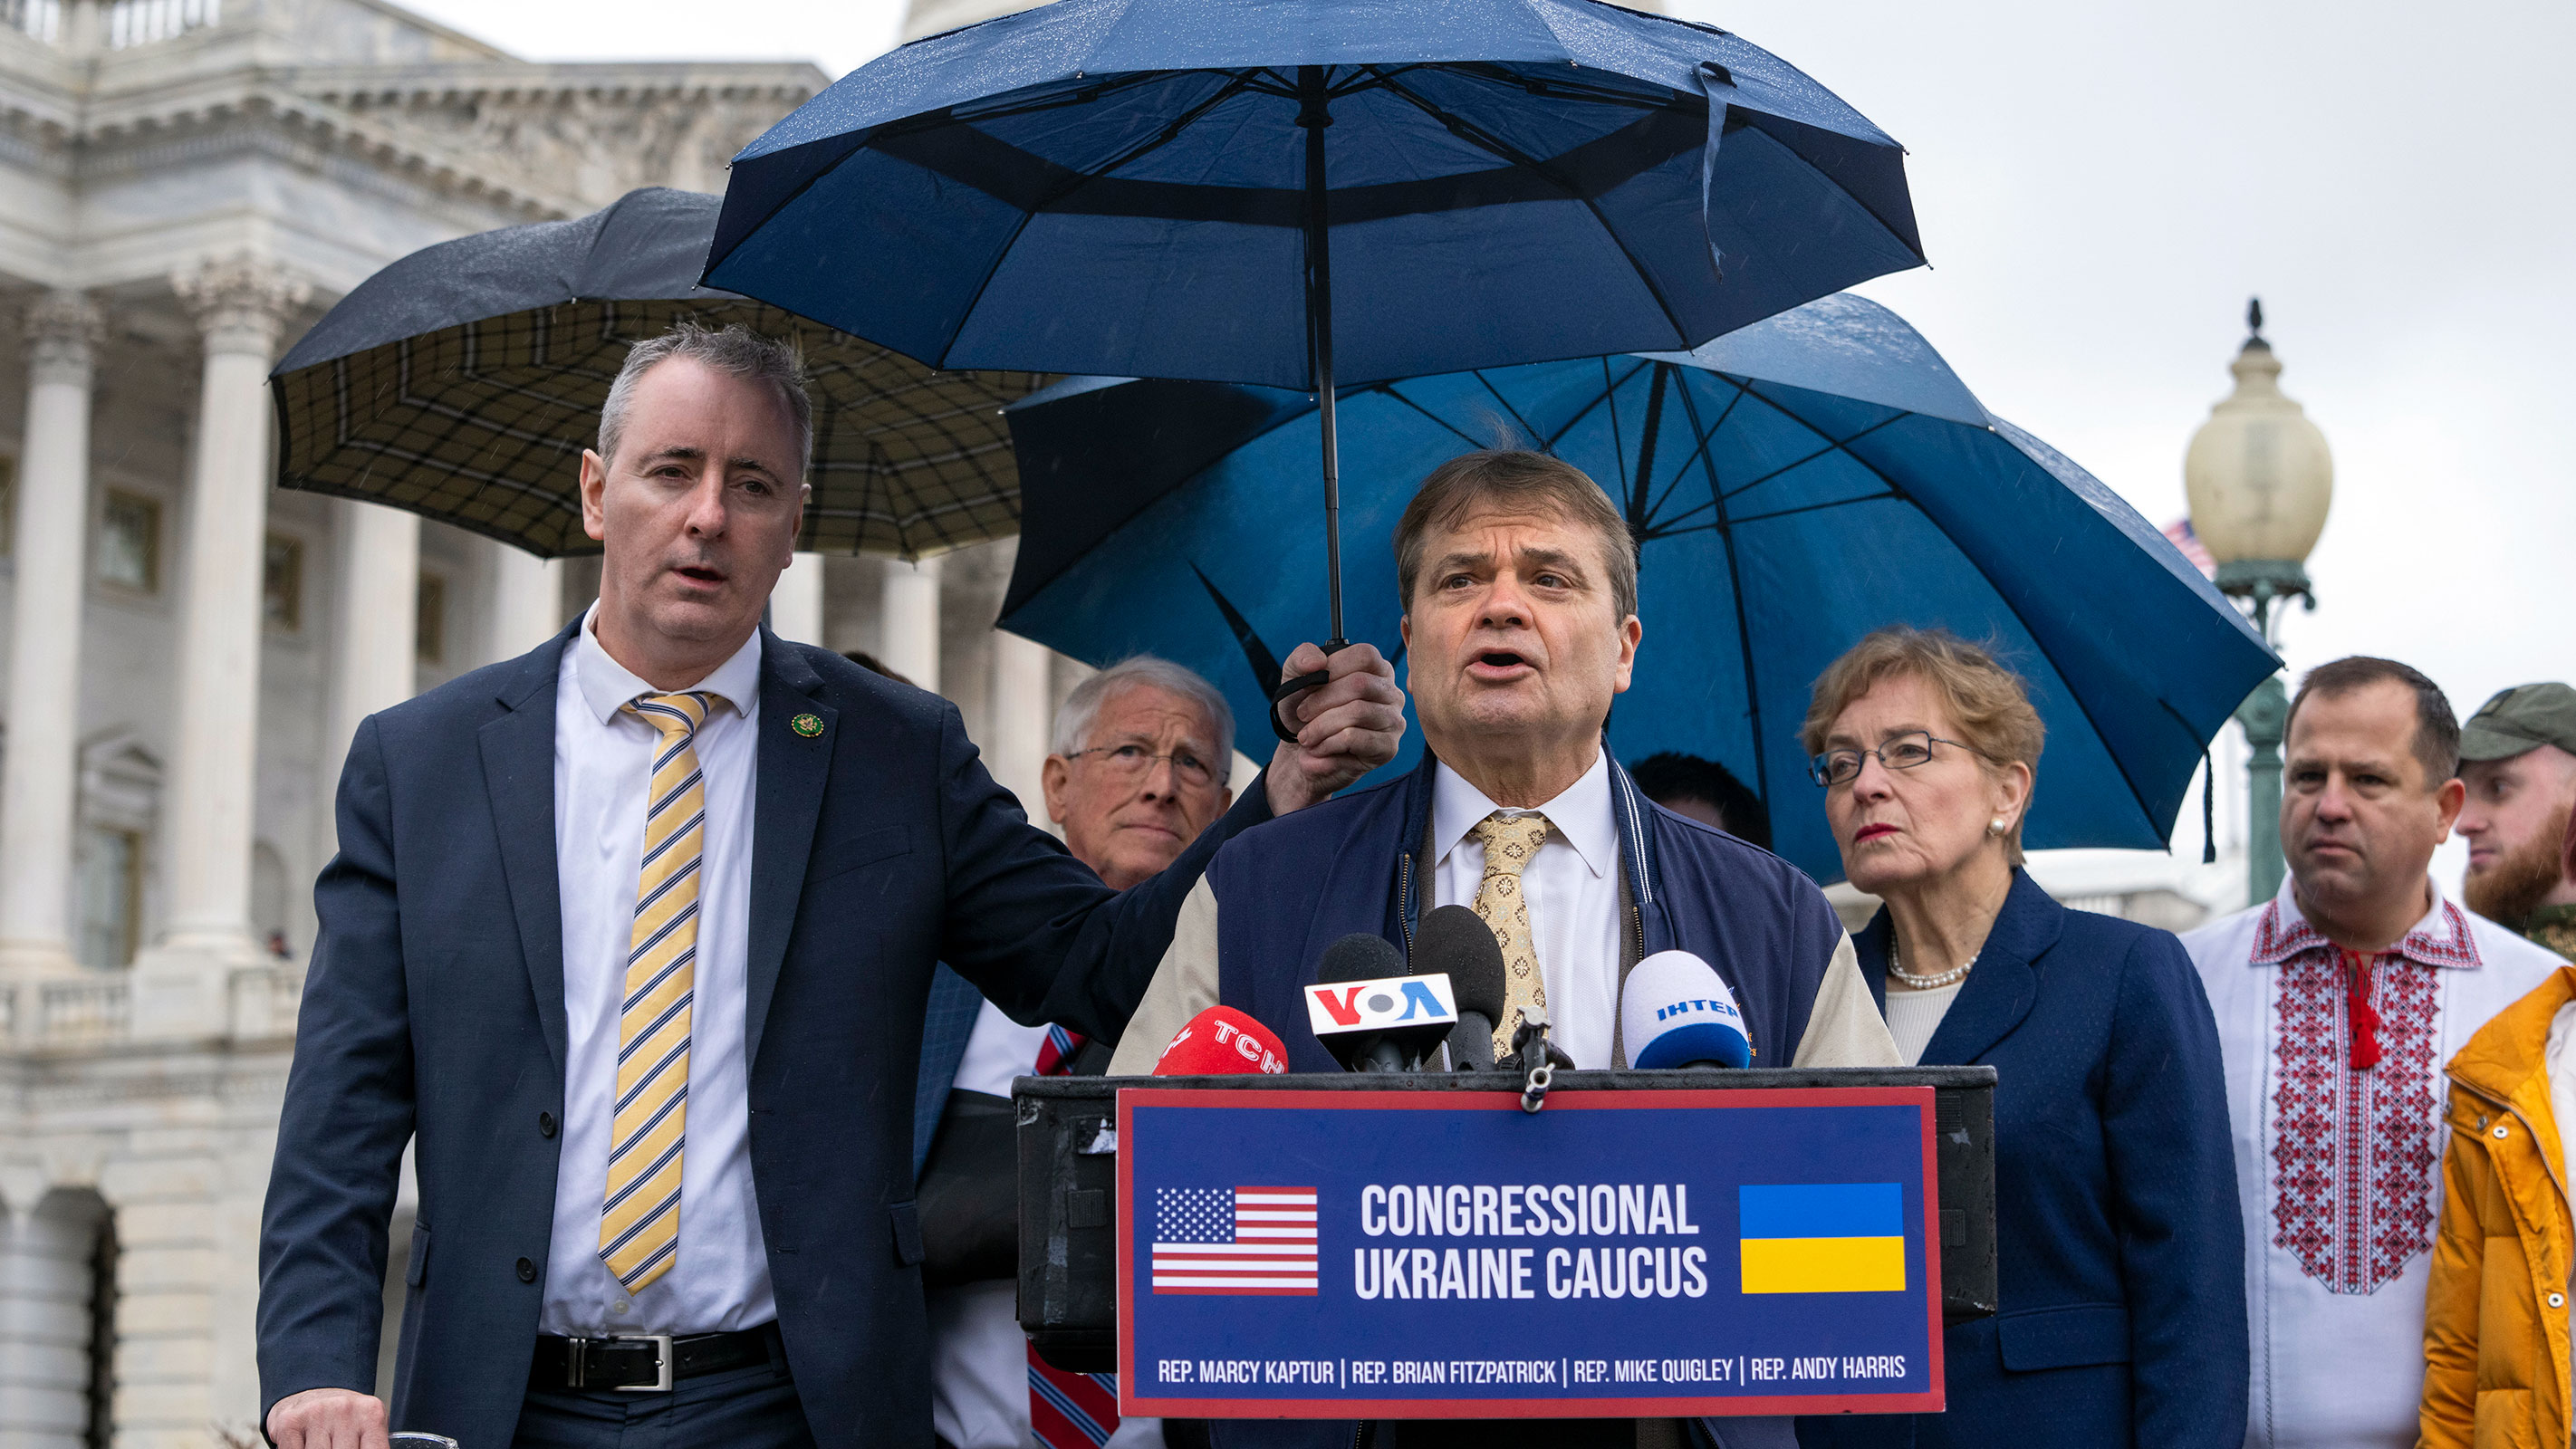 Rep. Mike Quigley speaks at a news conference in January about the war in Ukraine, on Capitol Hill in Washington, DC.